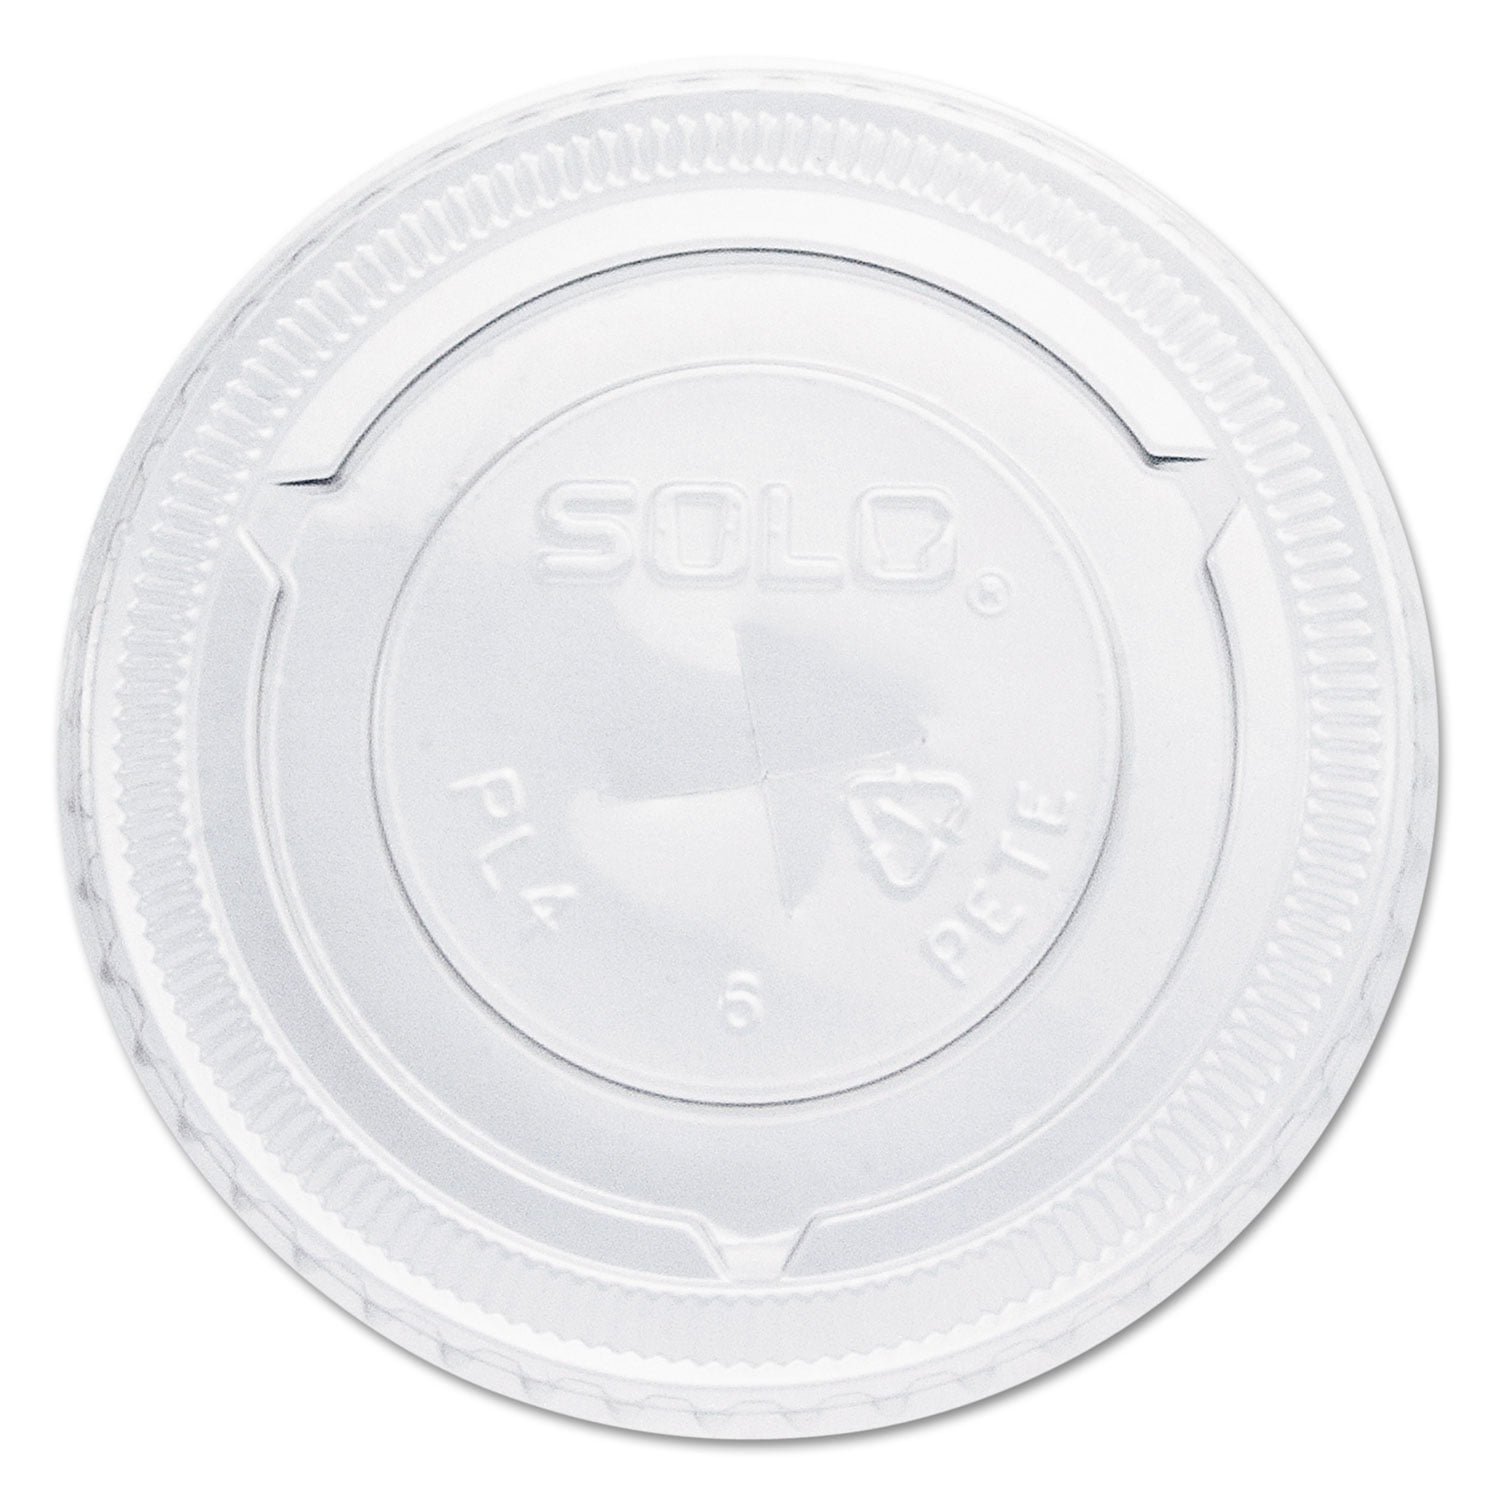 Dart Solo Portion Cup Lid 125 Ct 